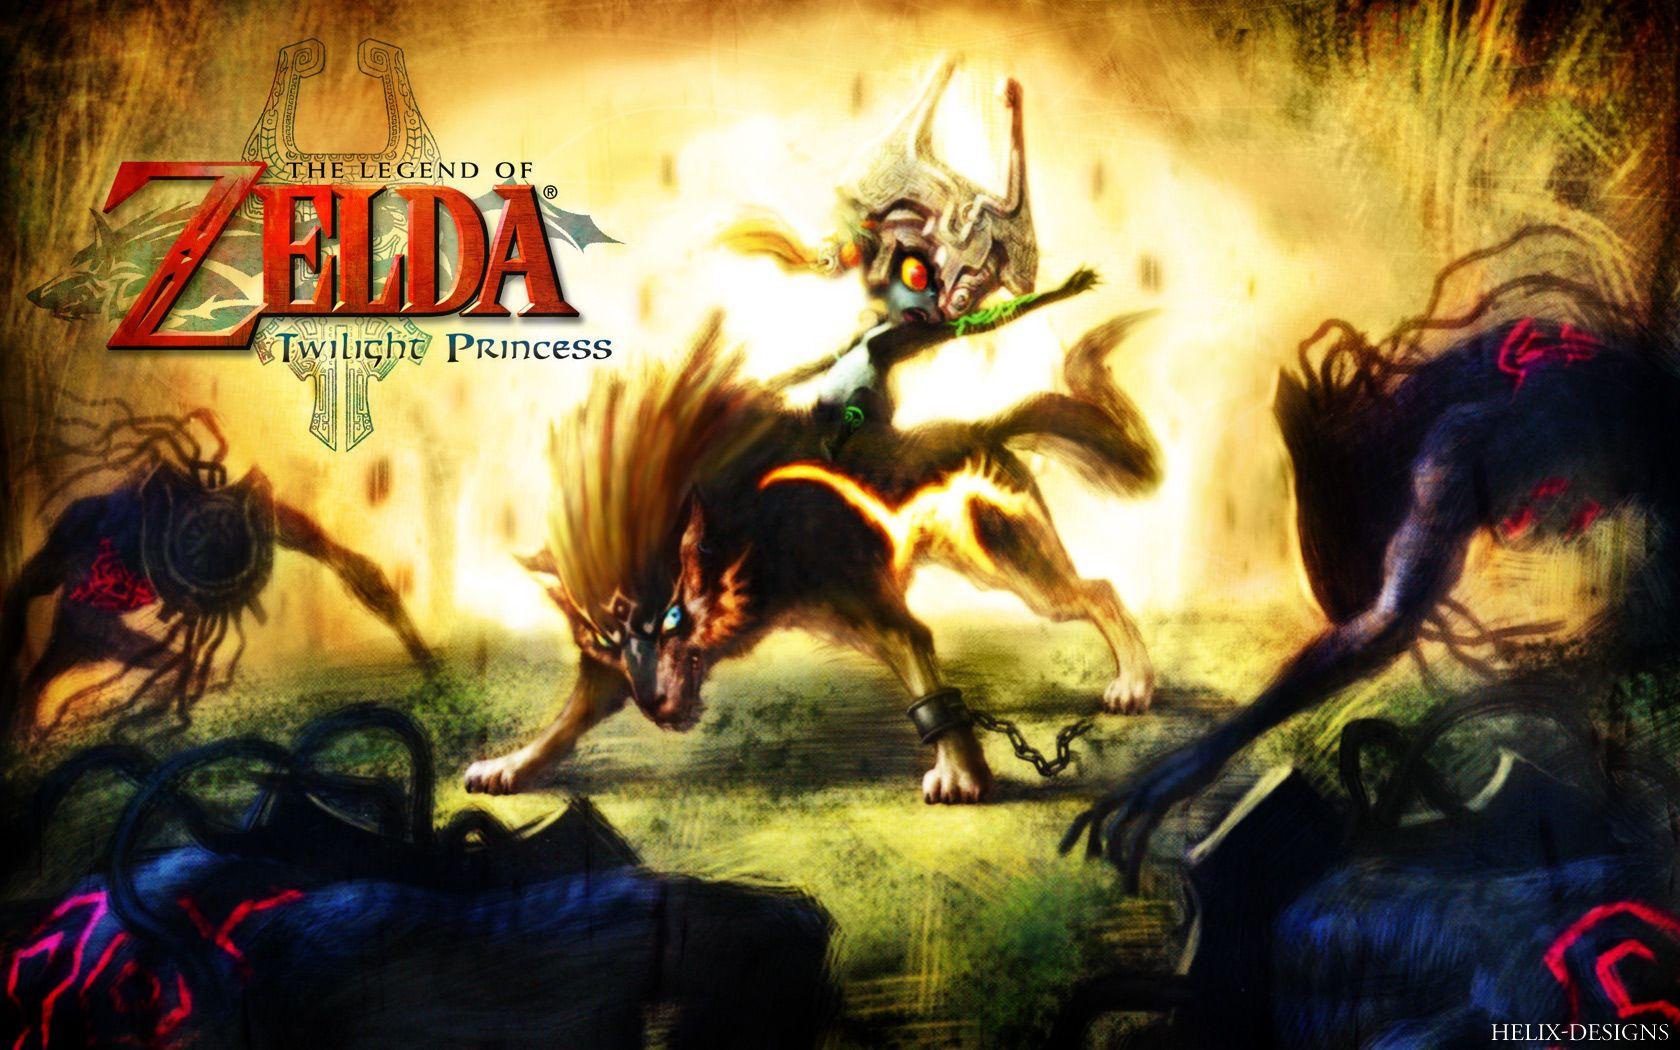 The Legend of Zelda: Twilight Princess and Scan Gallery